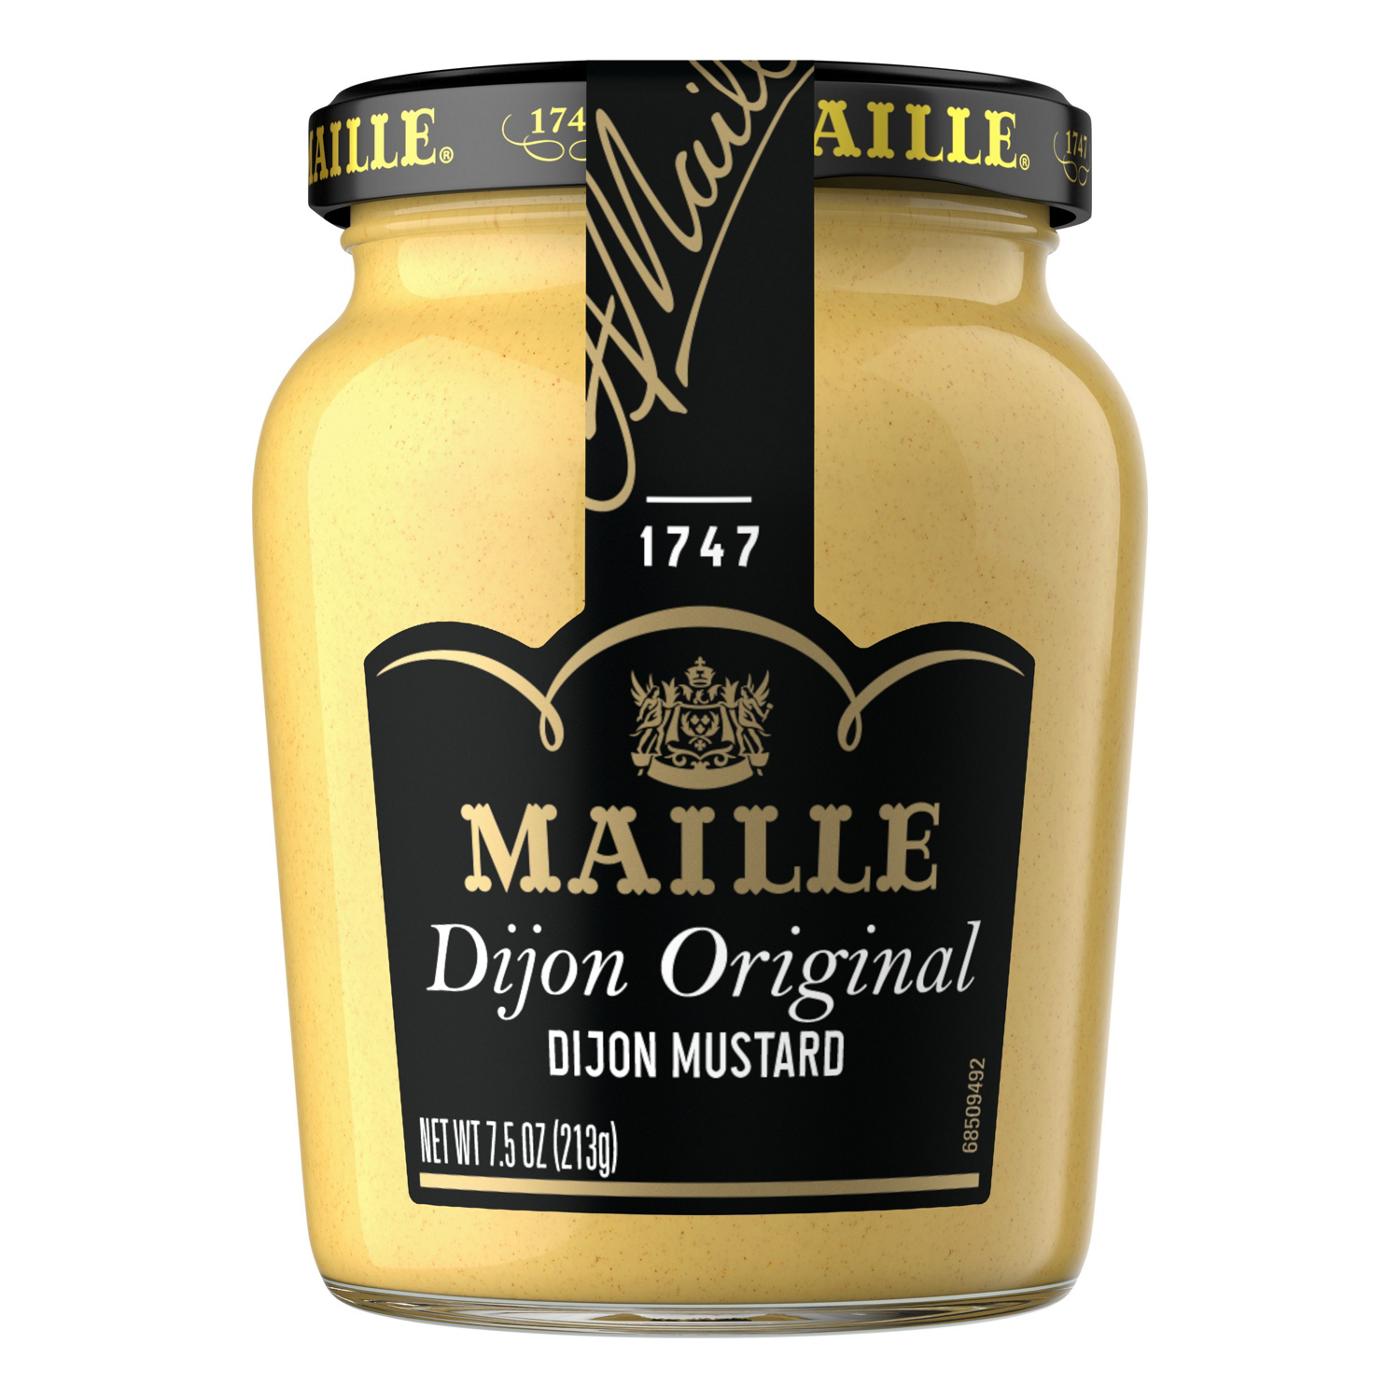 Maille Originale Traditional Dijon Mustard; image 1 of 10